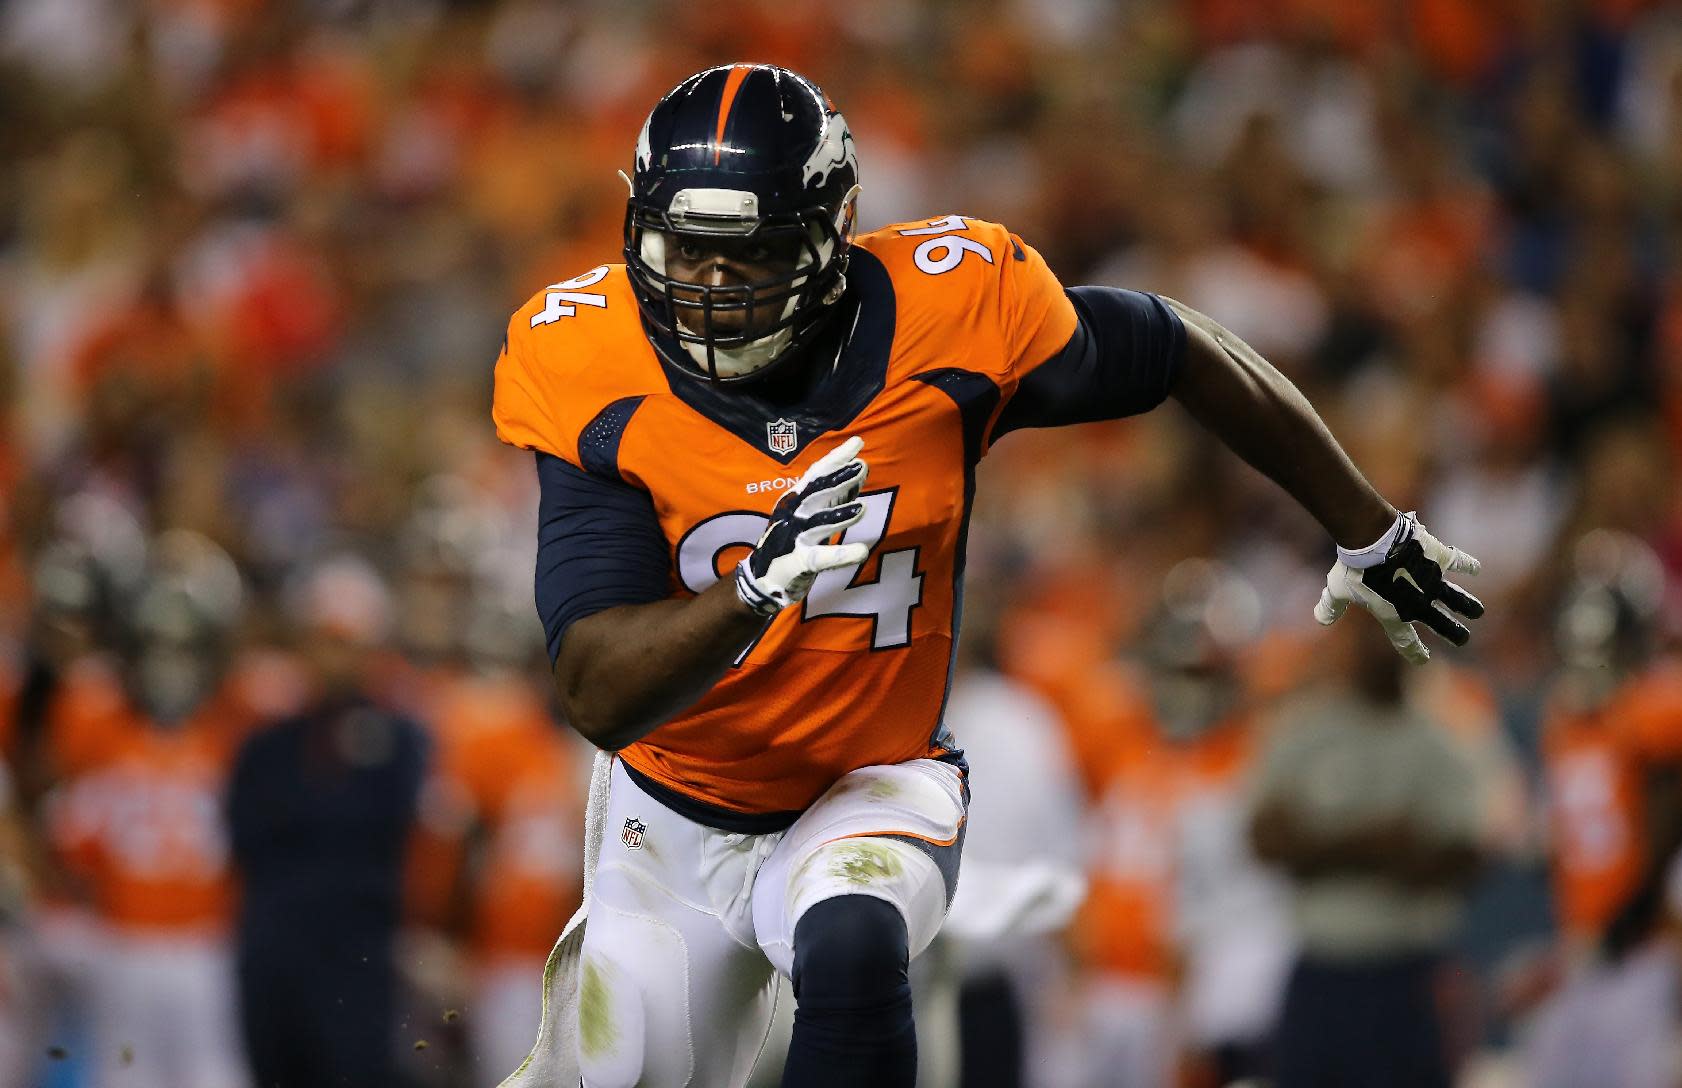 RADIO DeMarcus Ware explains the defensive mentality of the 20 Denver